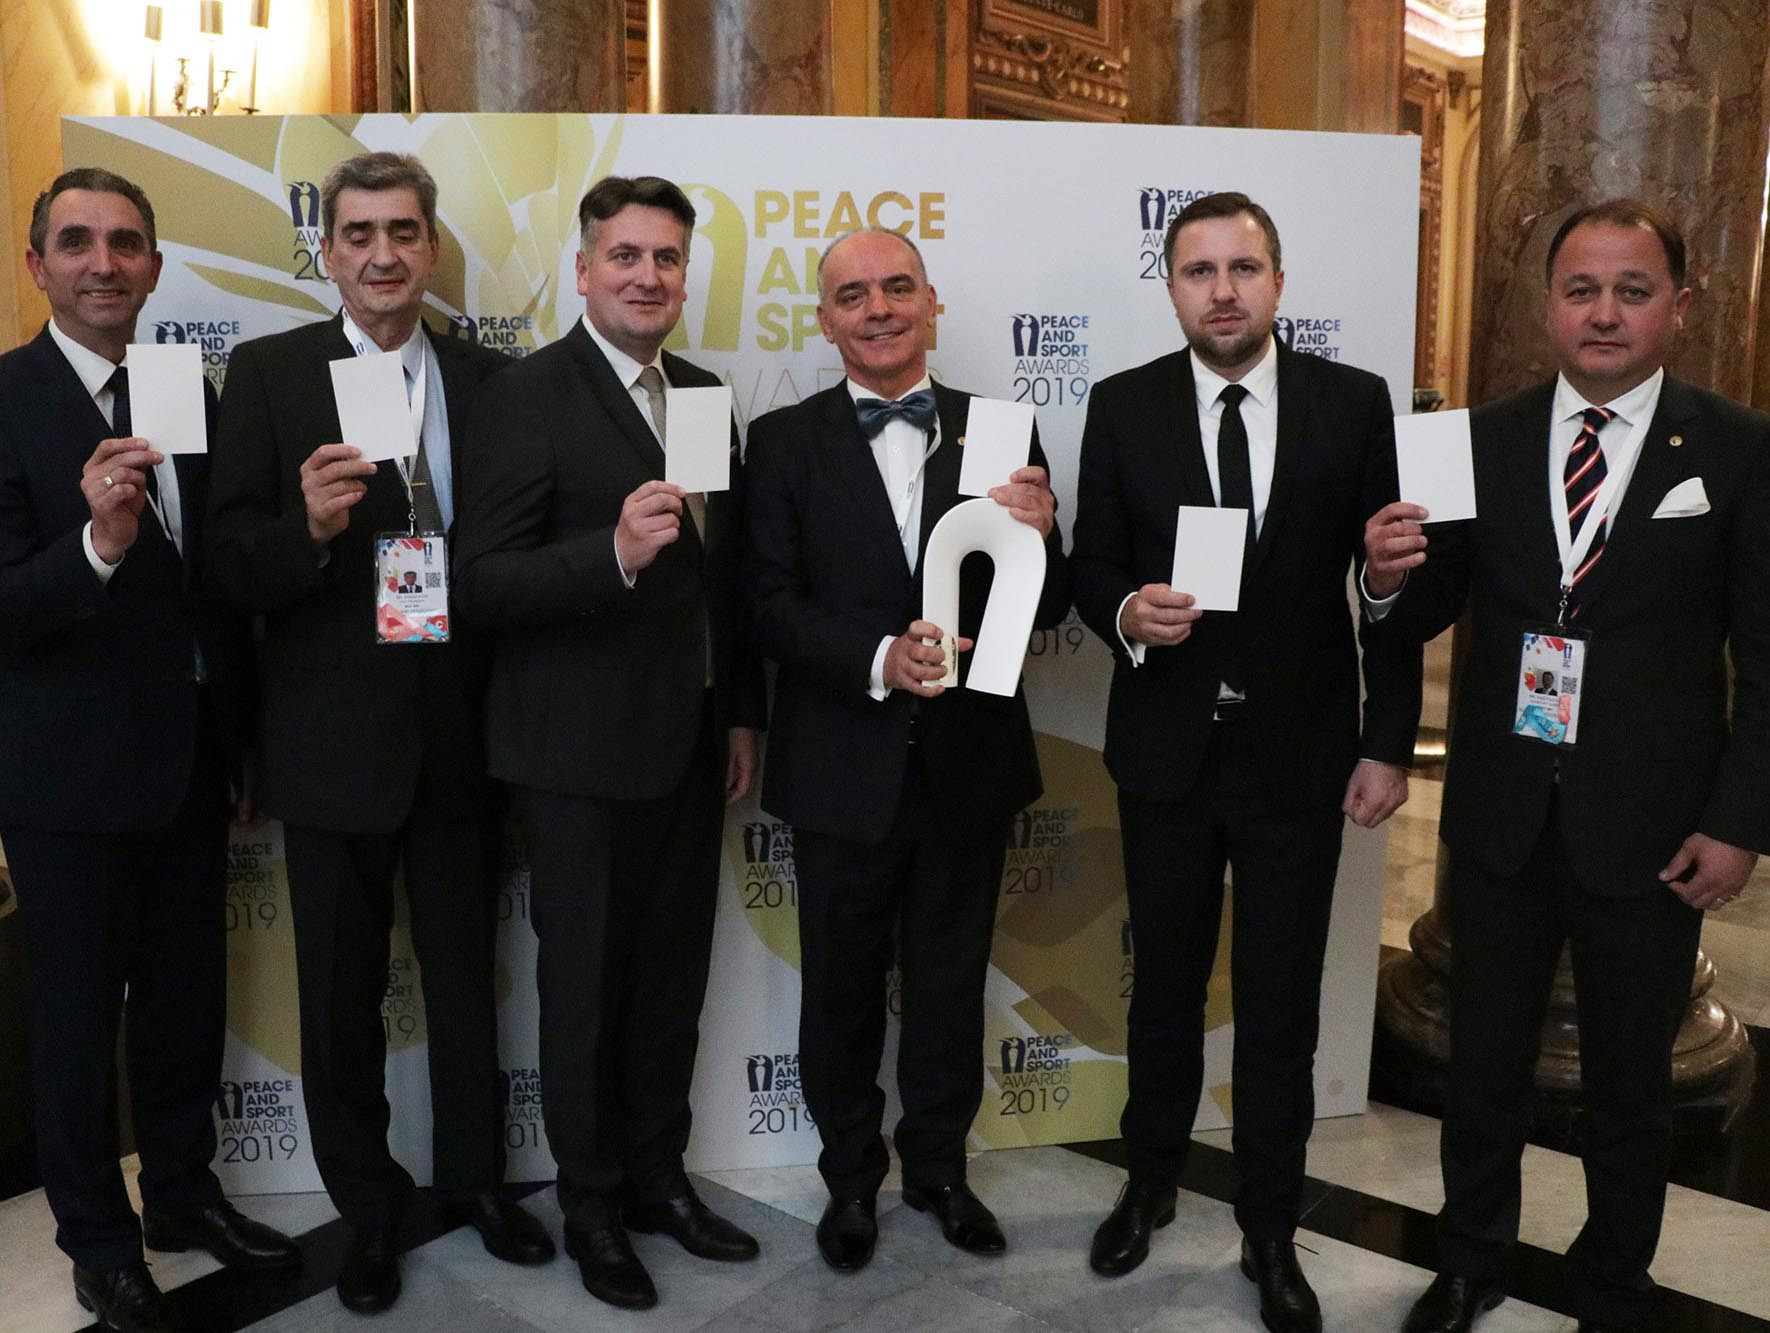 Other awards were given out, with the National Olympic Committee of Bosnia and Herzegovina and the two cities of Sarajevo and East Sarajevo receiving the diplomatic action of the year award ©Twitter